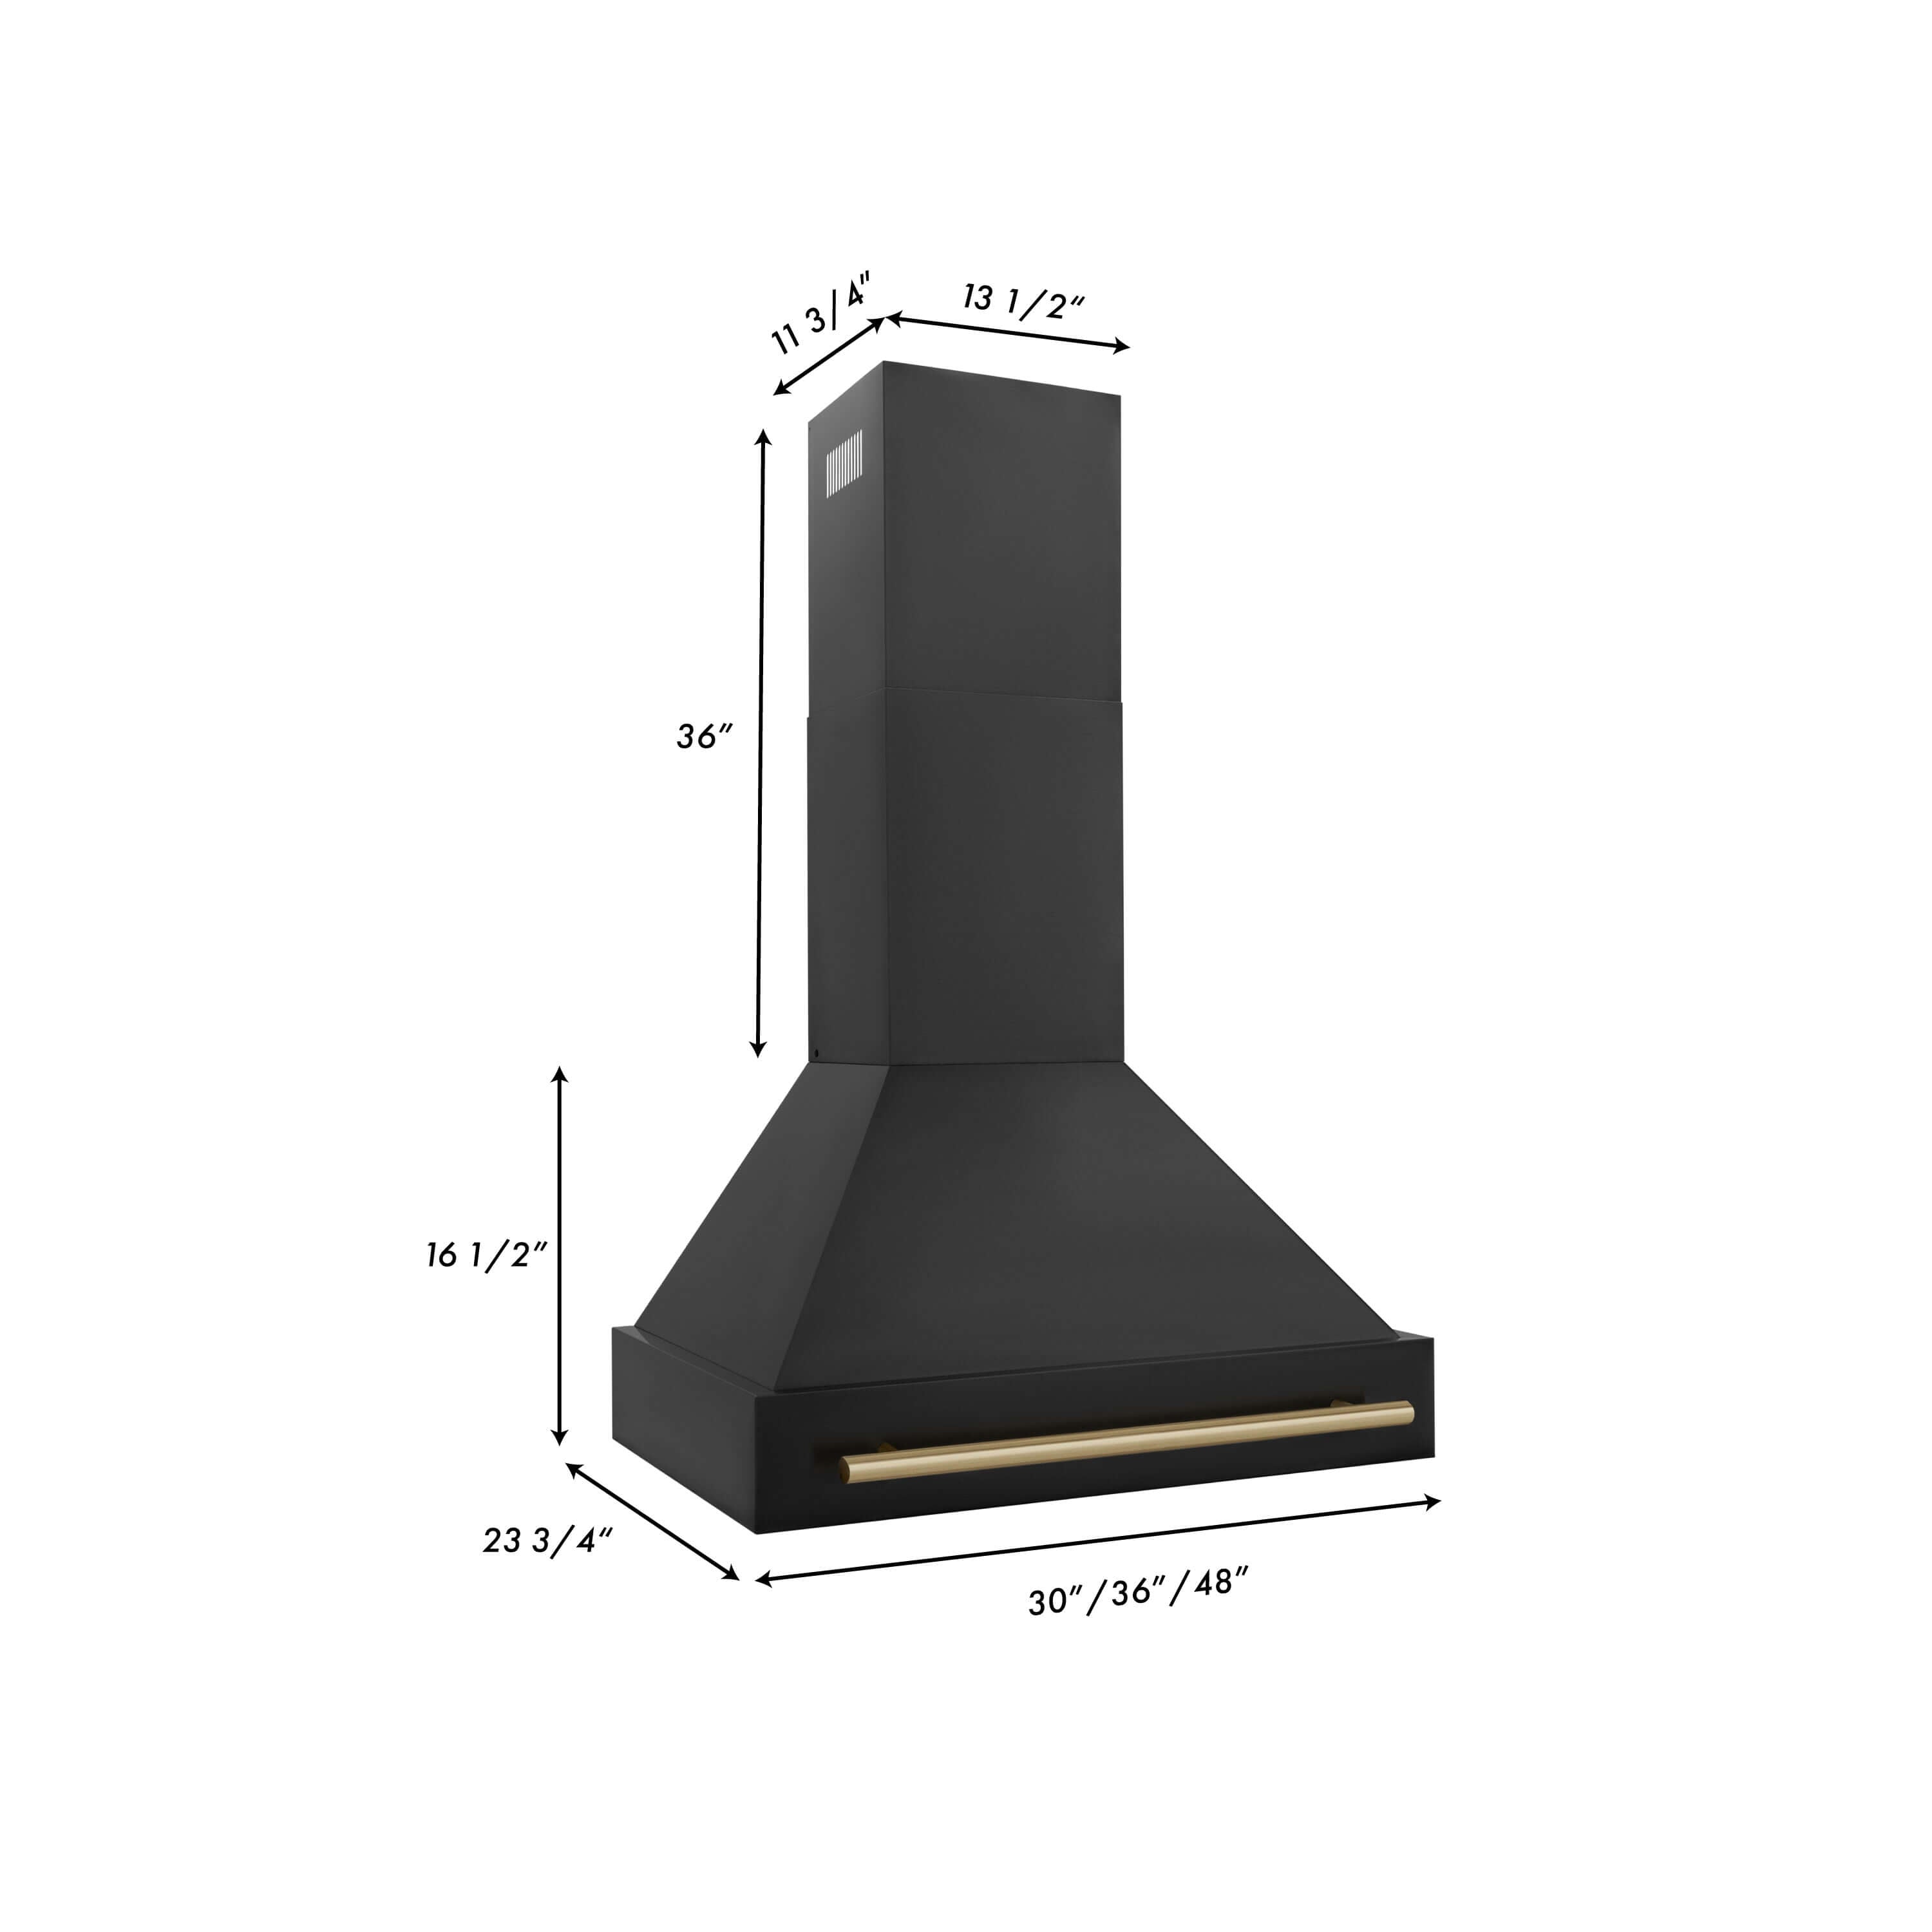 ZLINE Autograph Edition 30" Black Stainless Steel Range Hood with Champagne Bronze handle (BS655Z-30-CB) dimensional measurements.